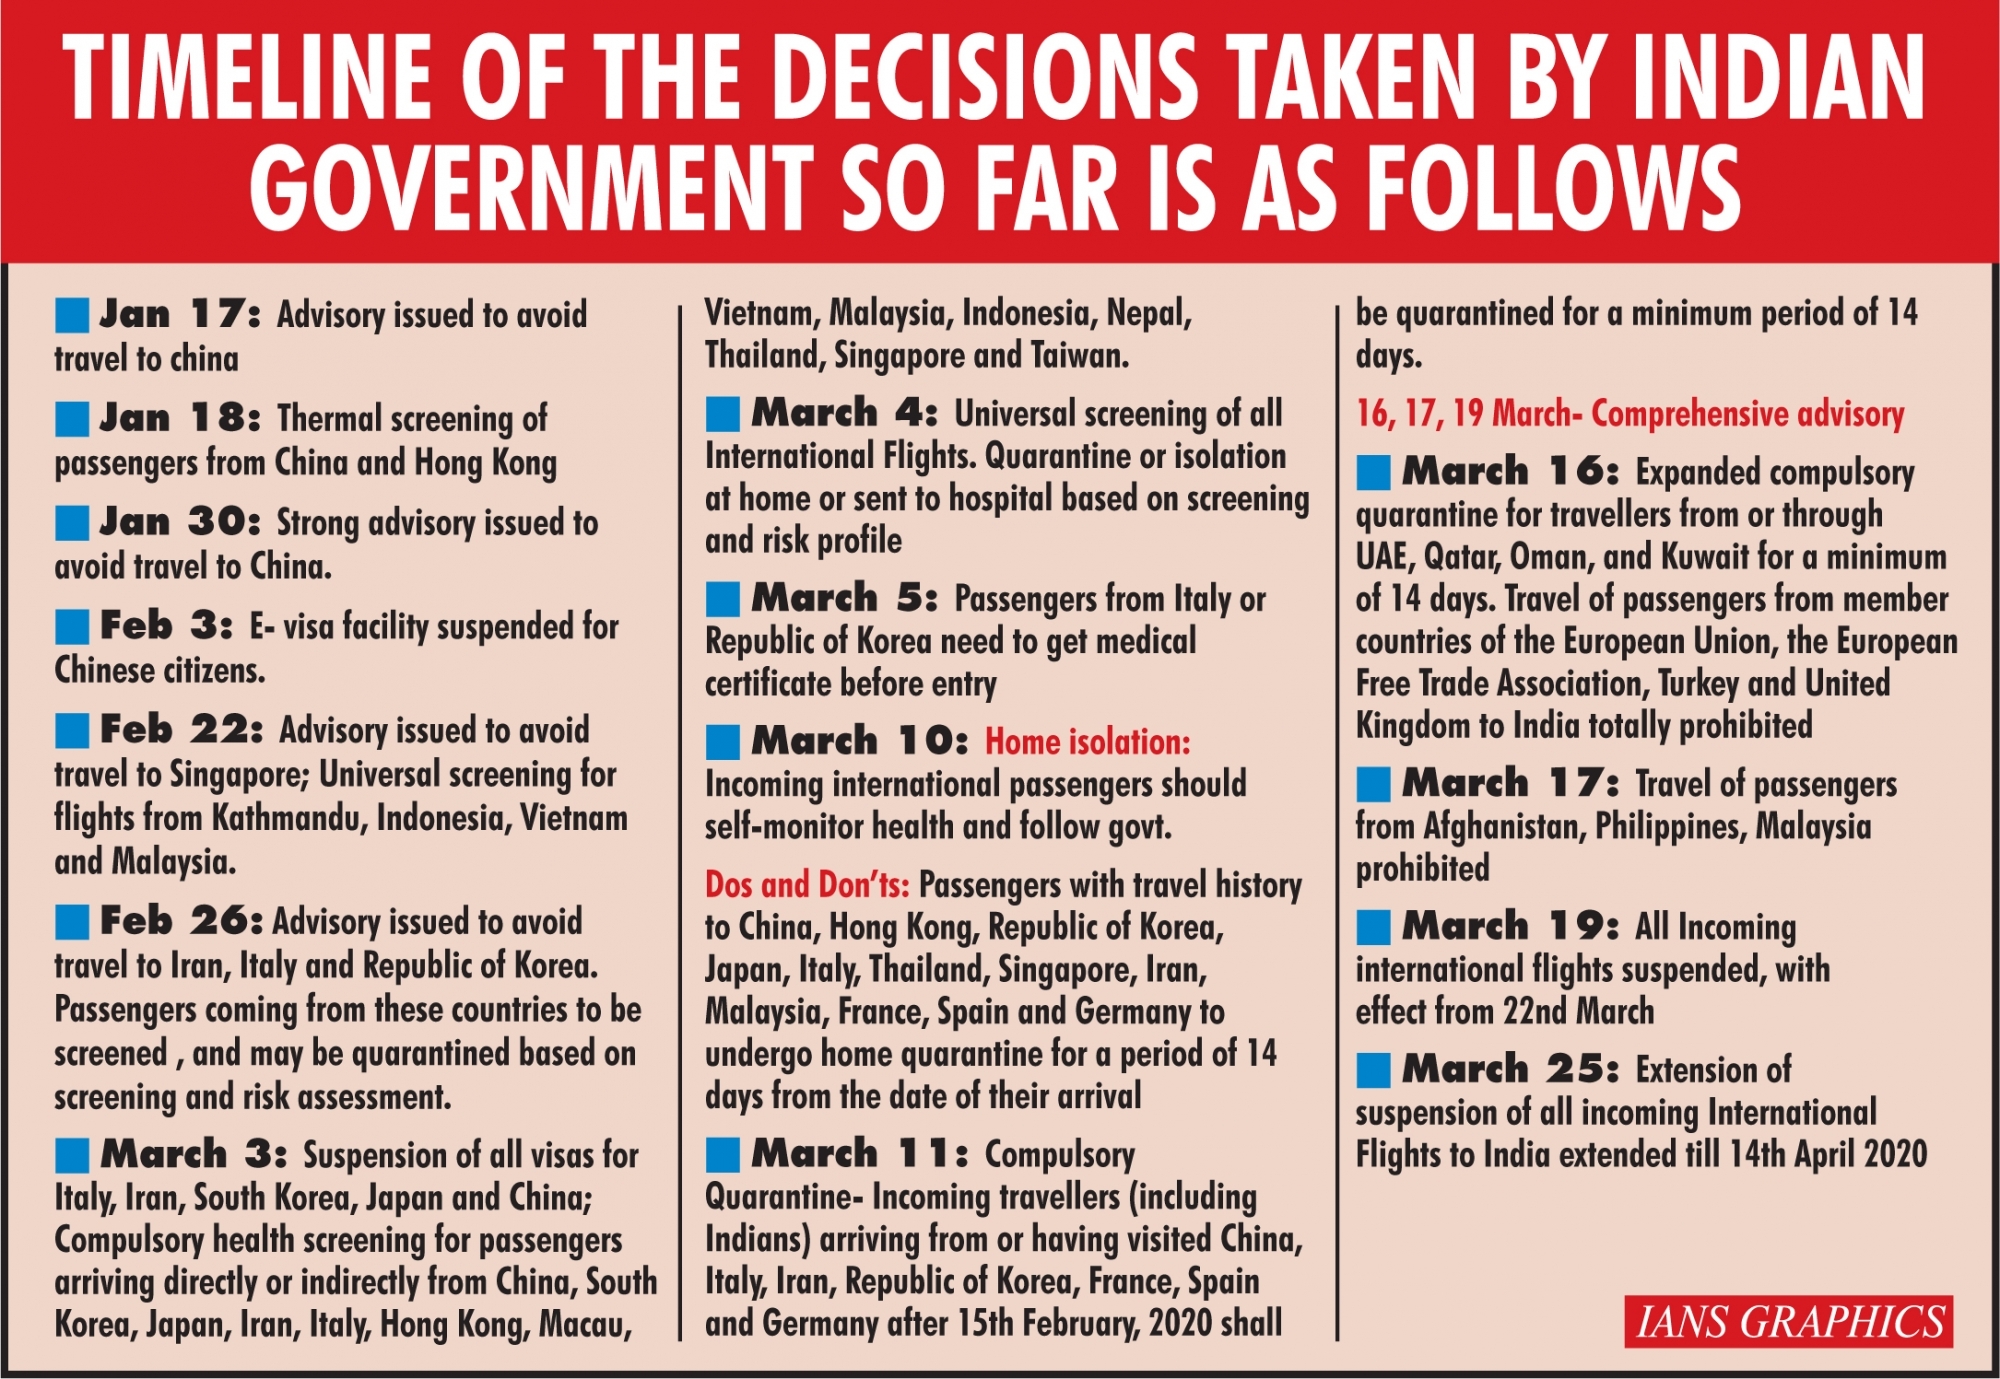 A timeline of the government's decisions so far